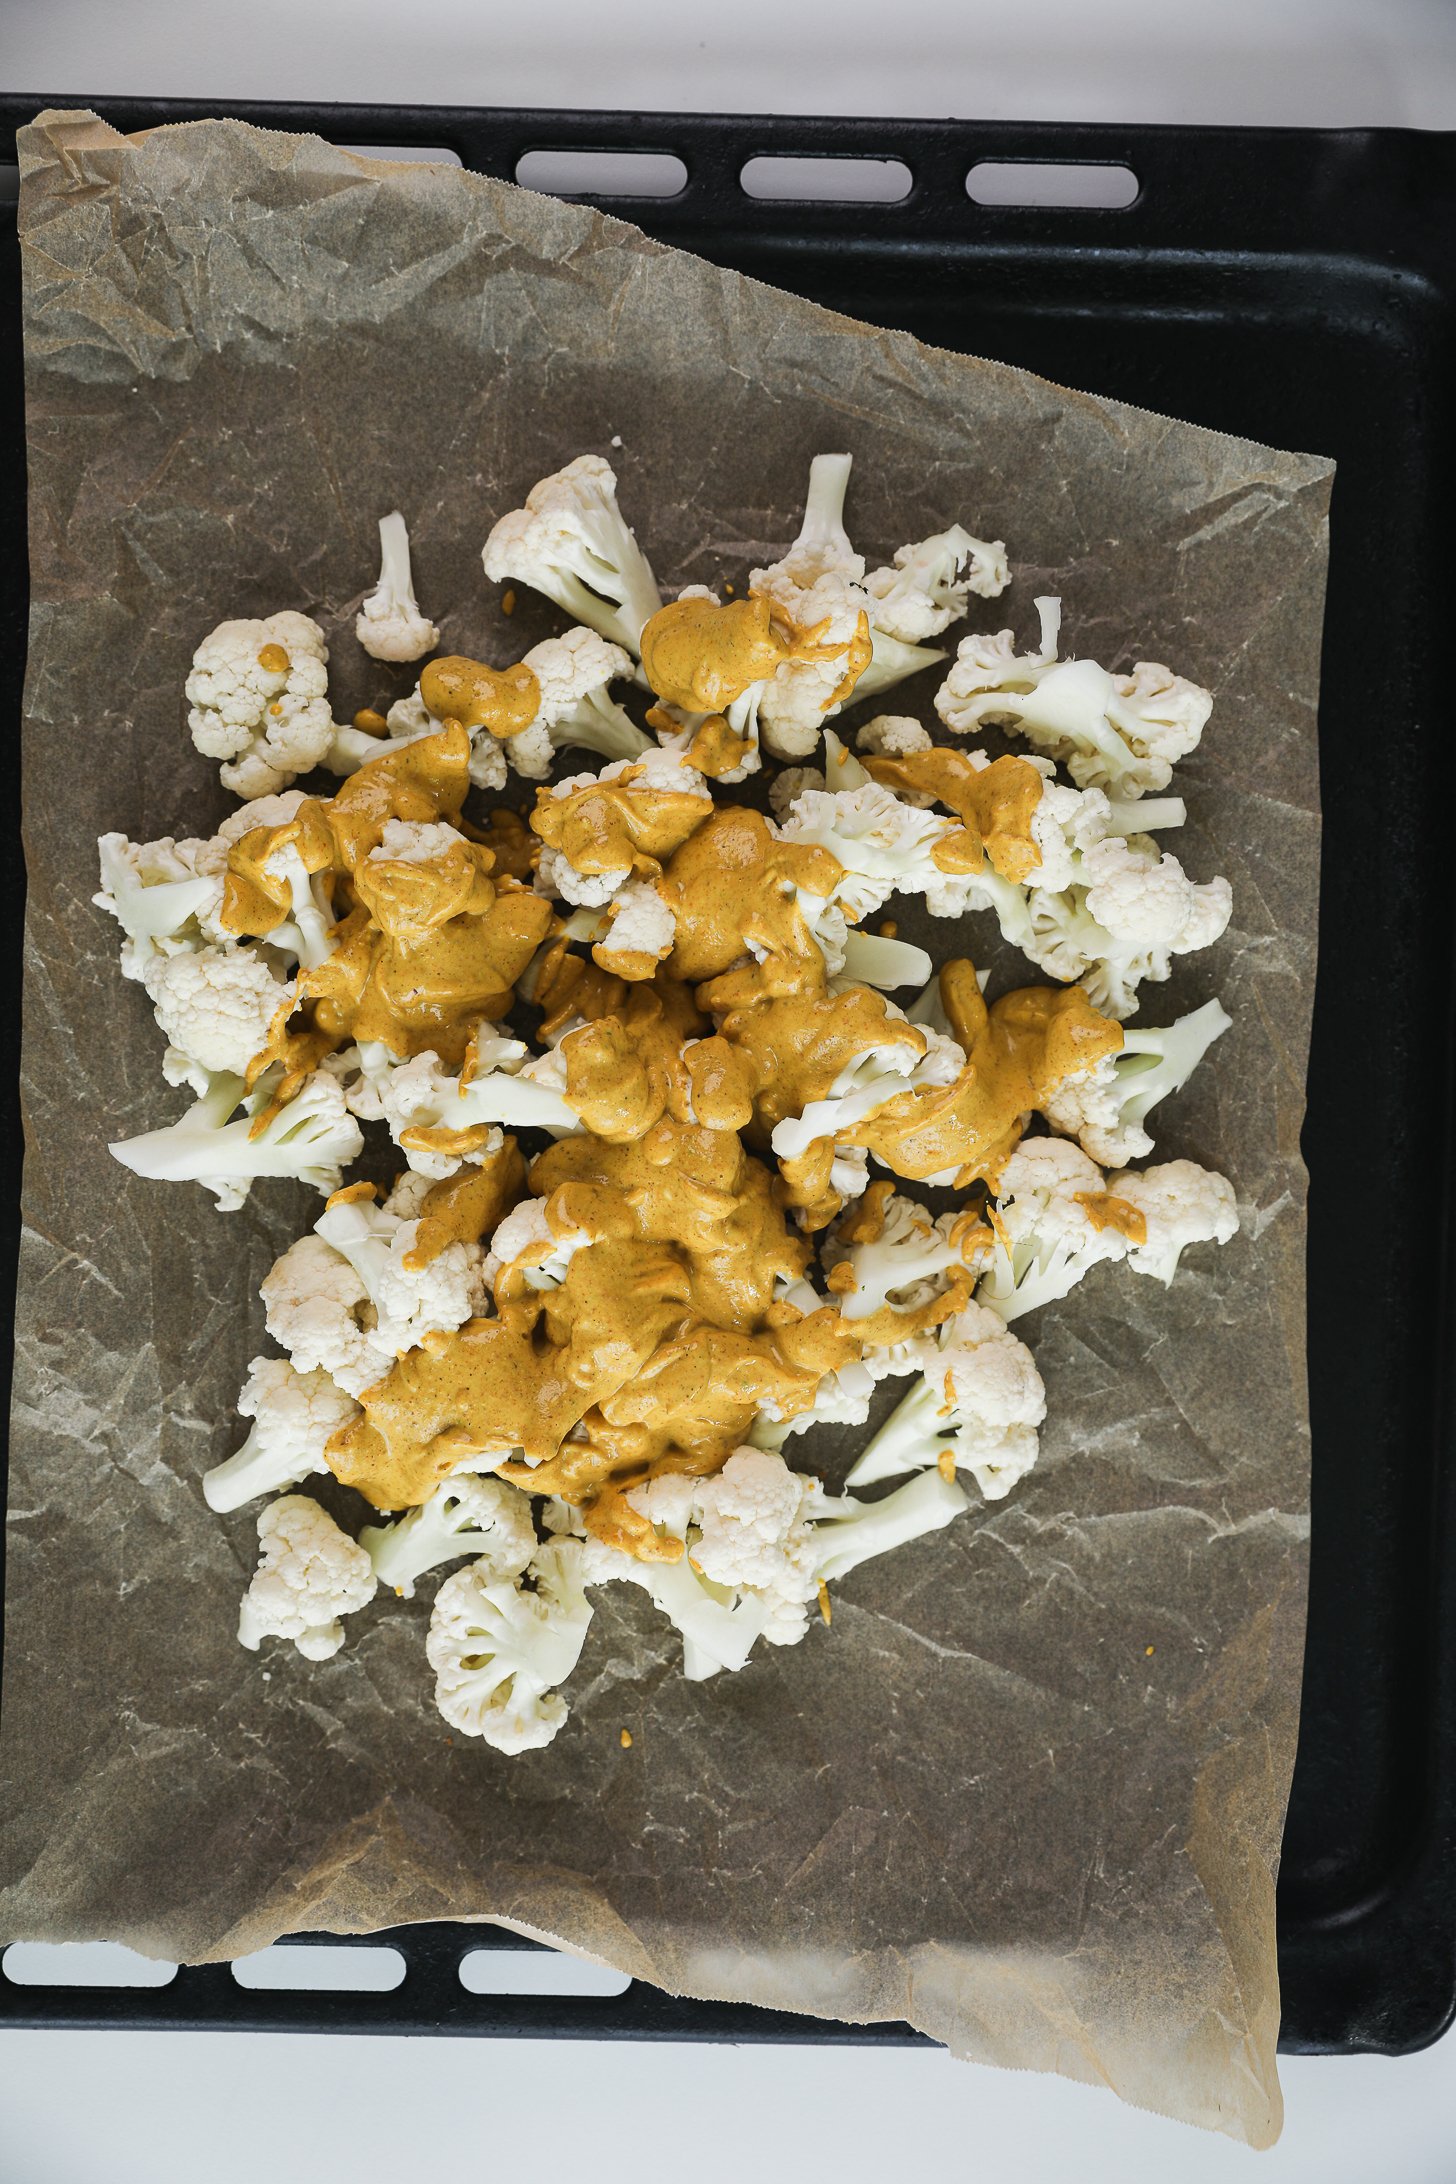 Overhead image of cauliflower florets topped with creamy tandoori marinade on a lined baking tray.